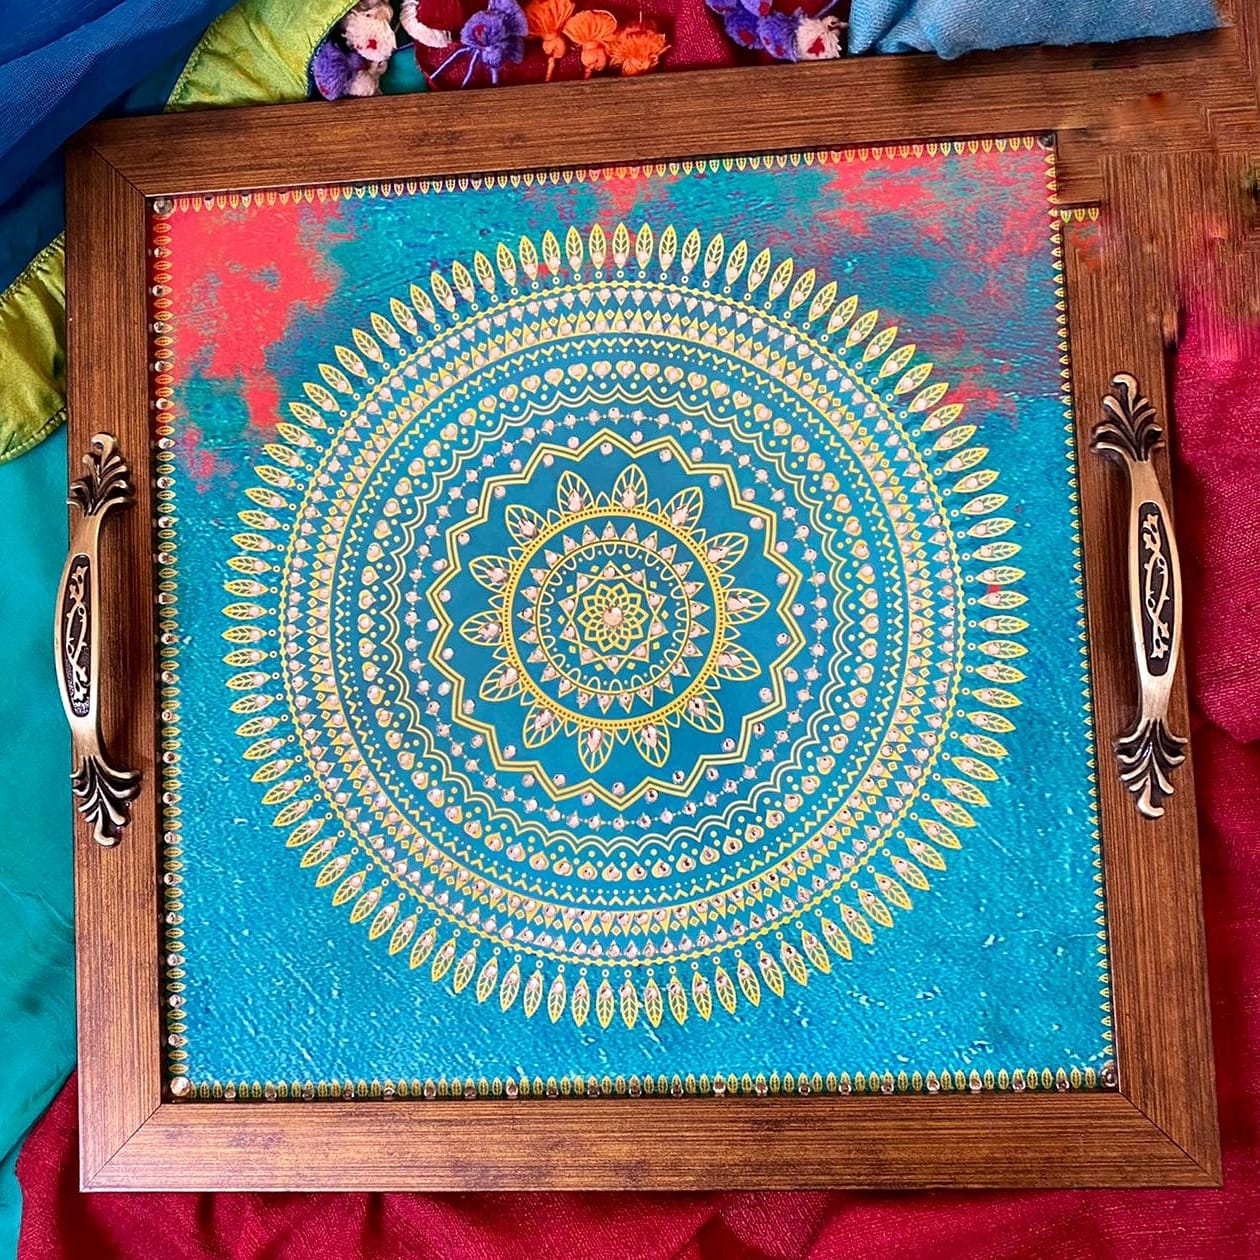 Handcrafted Serving Trays